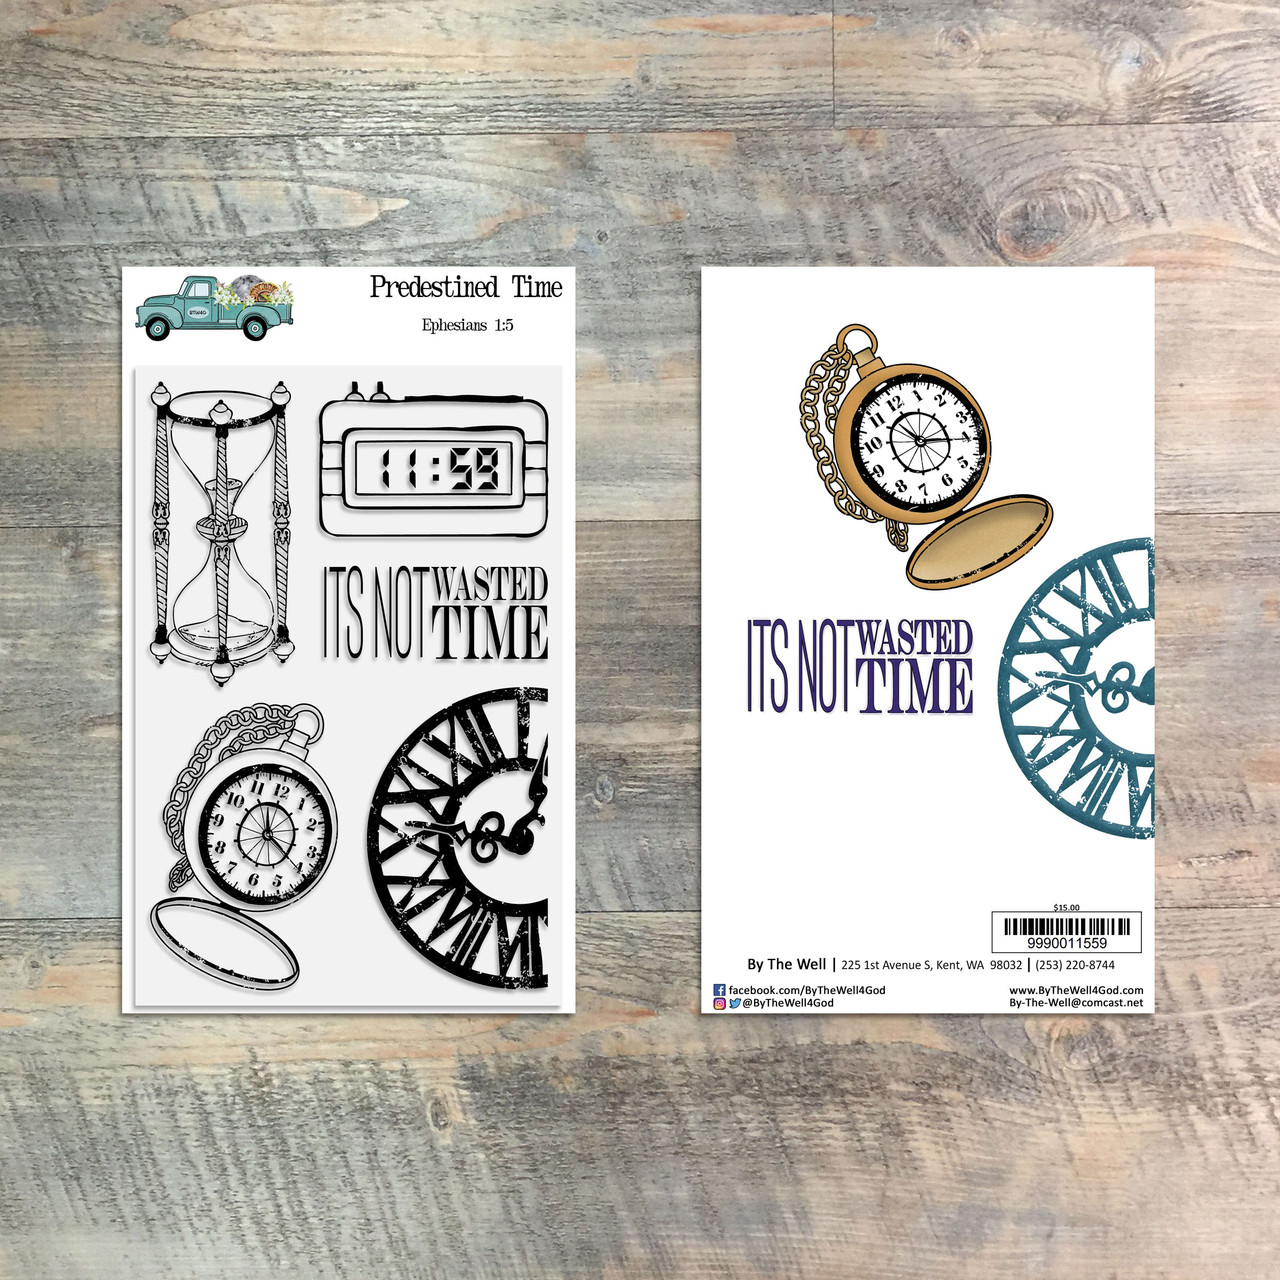 Predestined Time - 5 Piece Stamp Set - ByTheWell4God